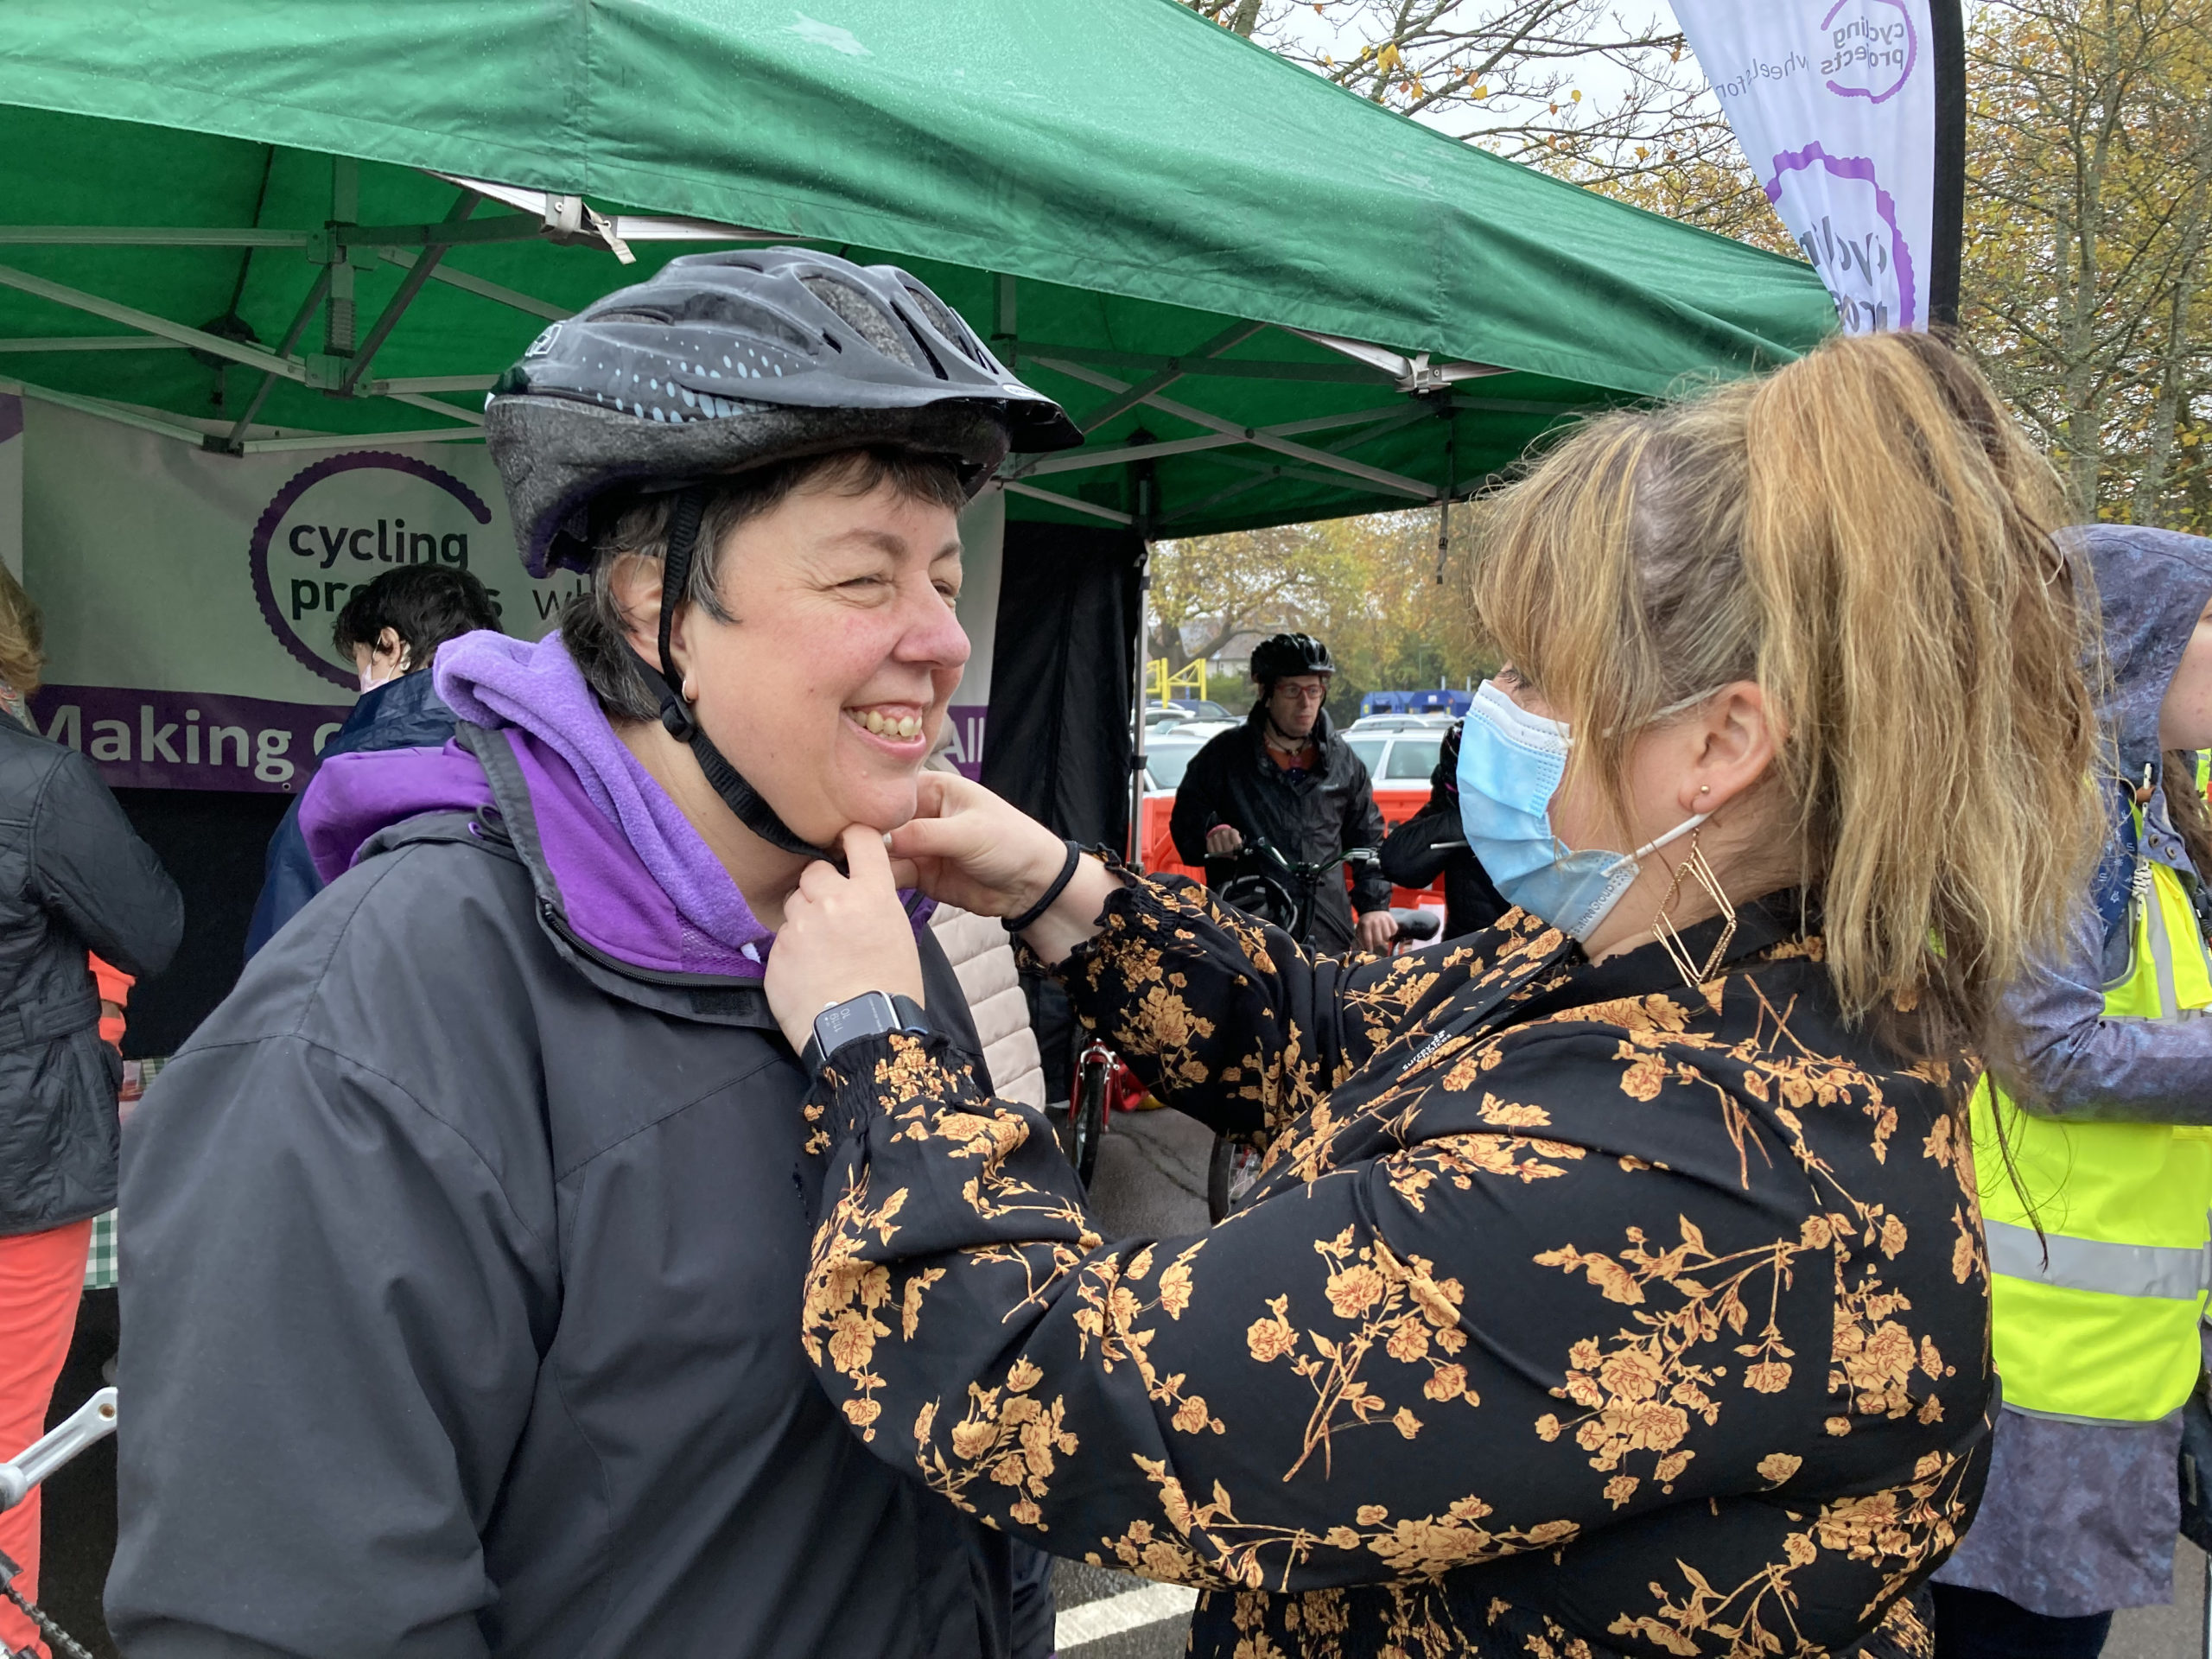 Community Support Worker helping someone with a bike helmet